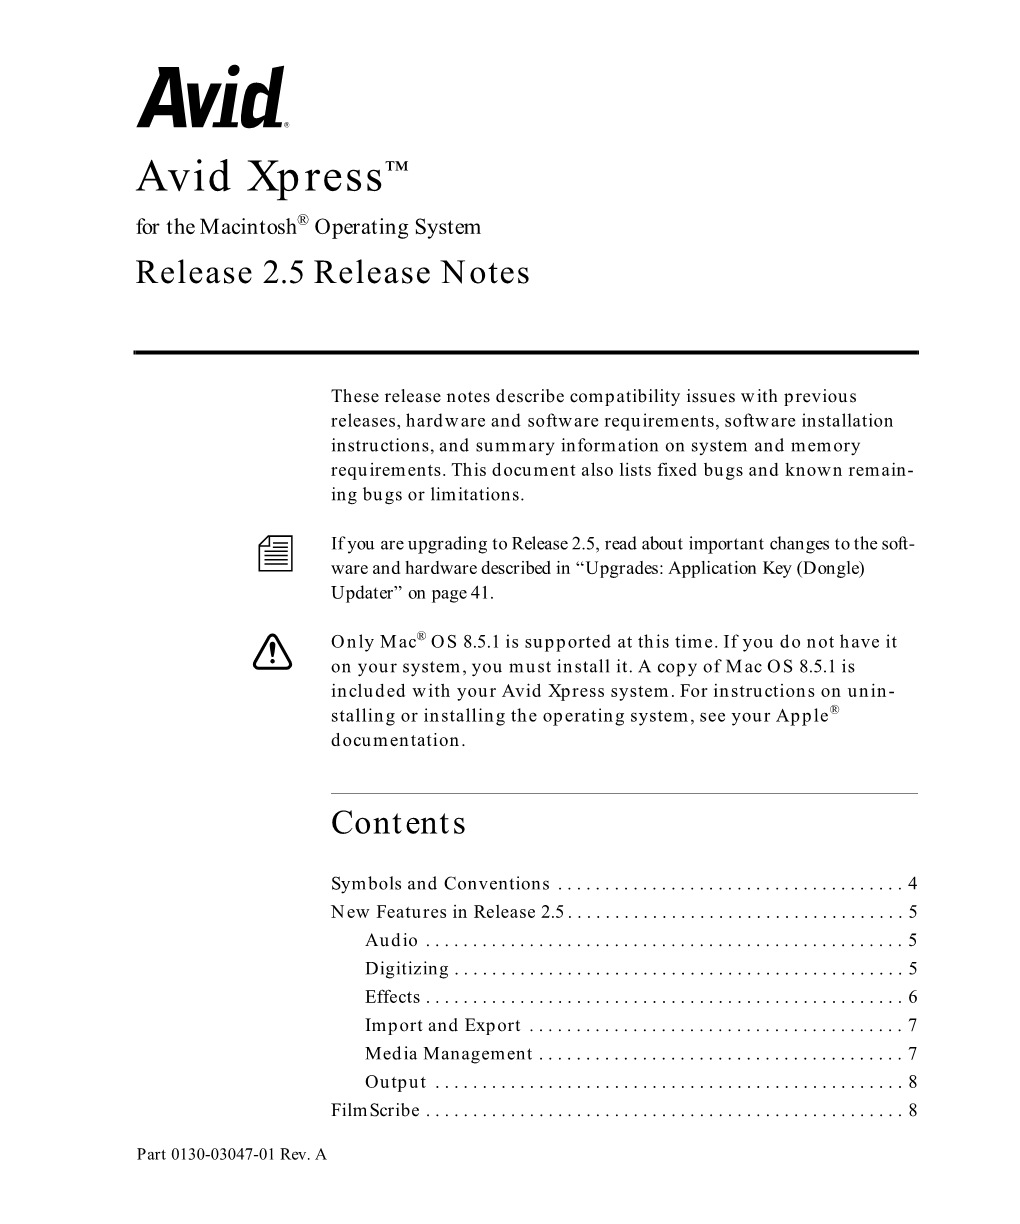 Avid Xpress™ for the Macintosh® Operating System Release 2.5 Release Notes